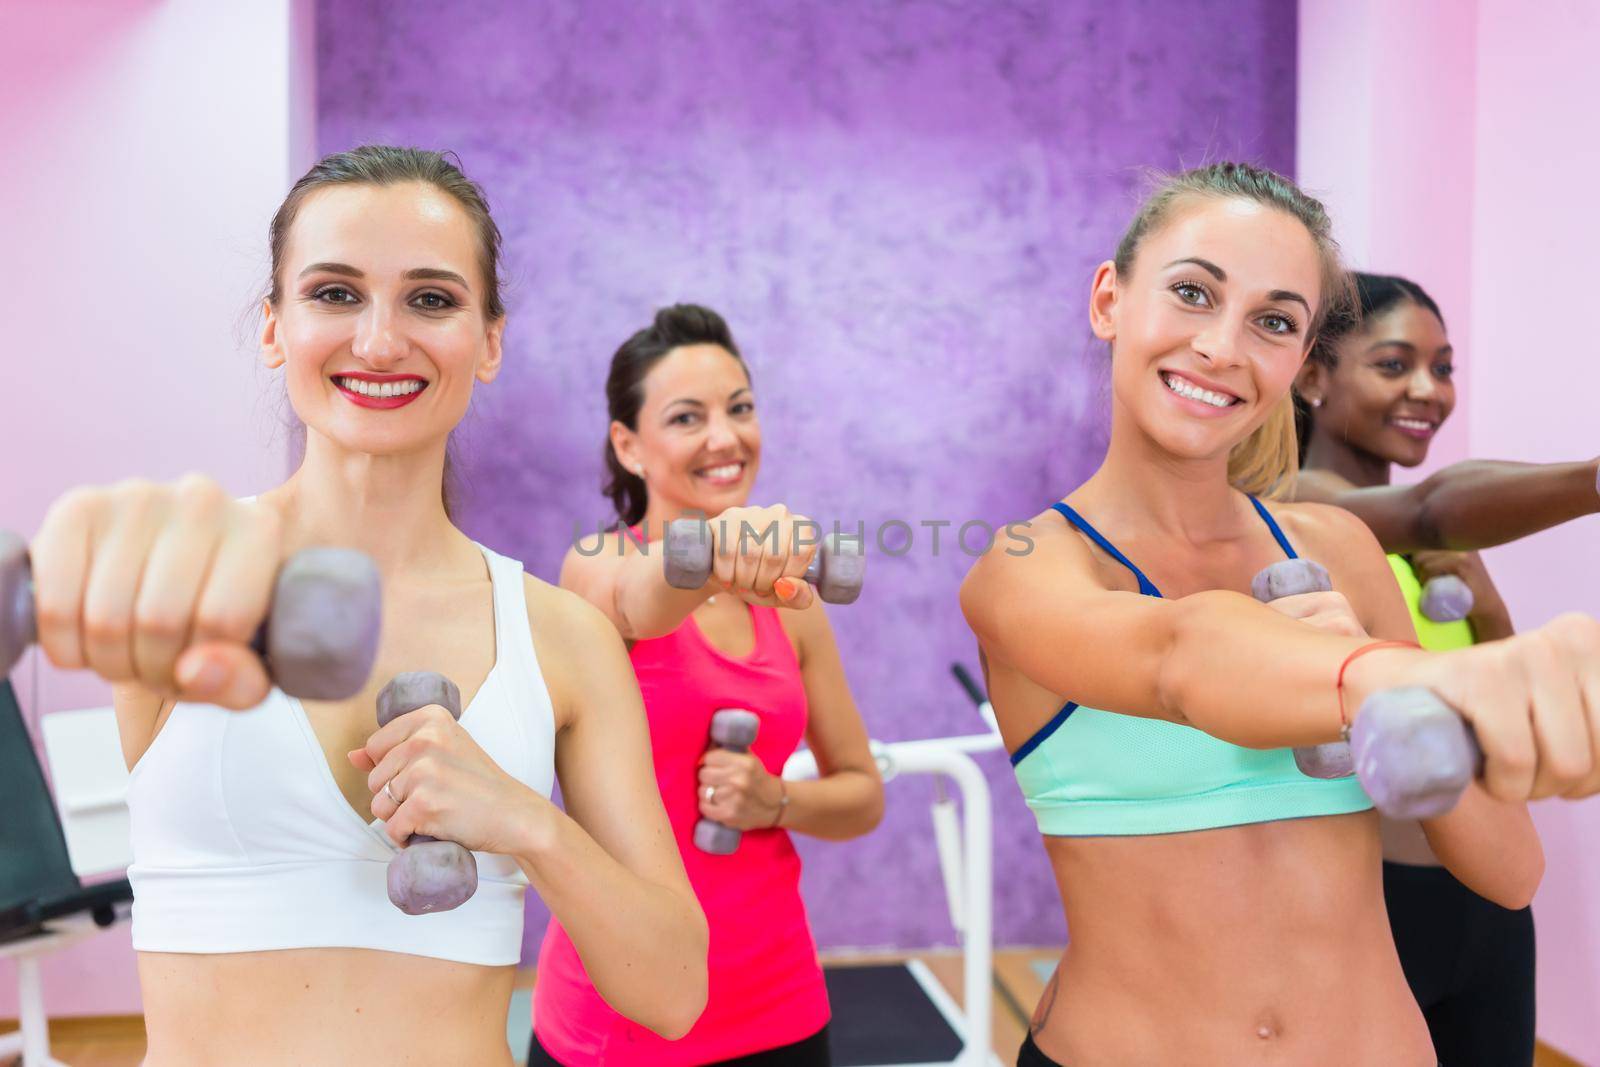 women exercising with dumbbells during group class in a contempo by Kzenon